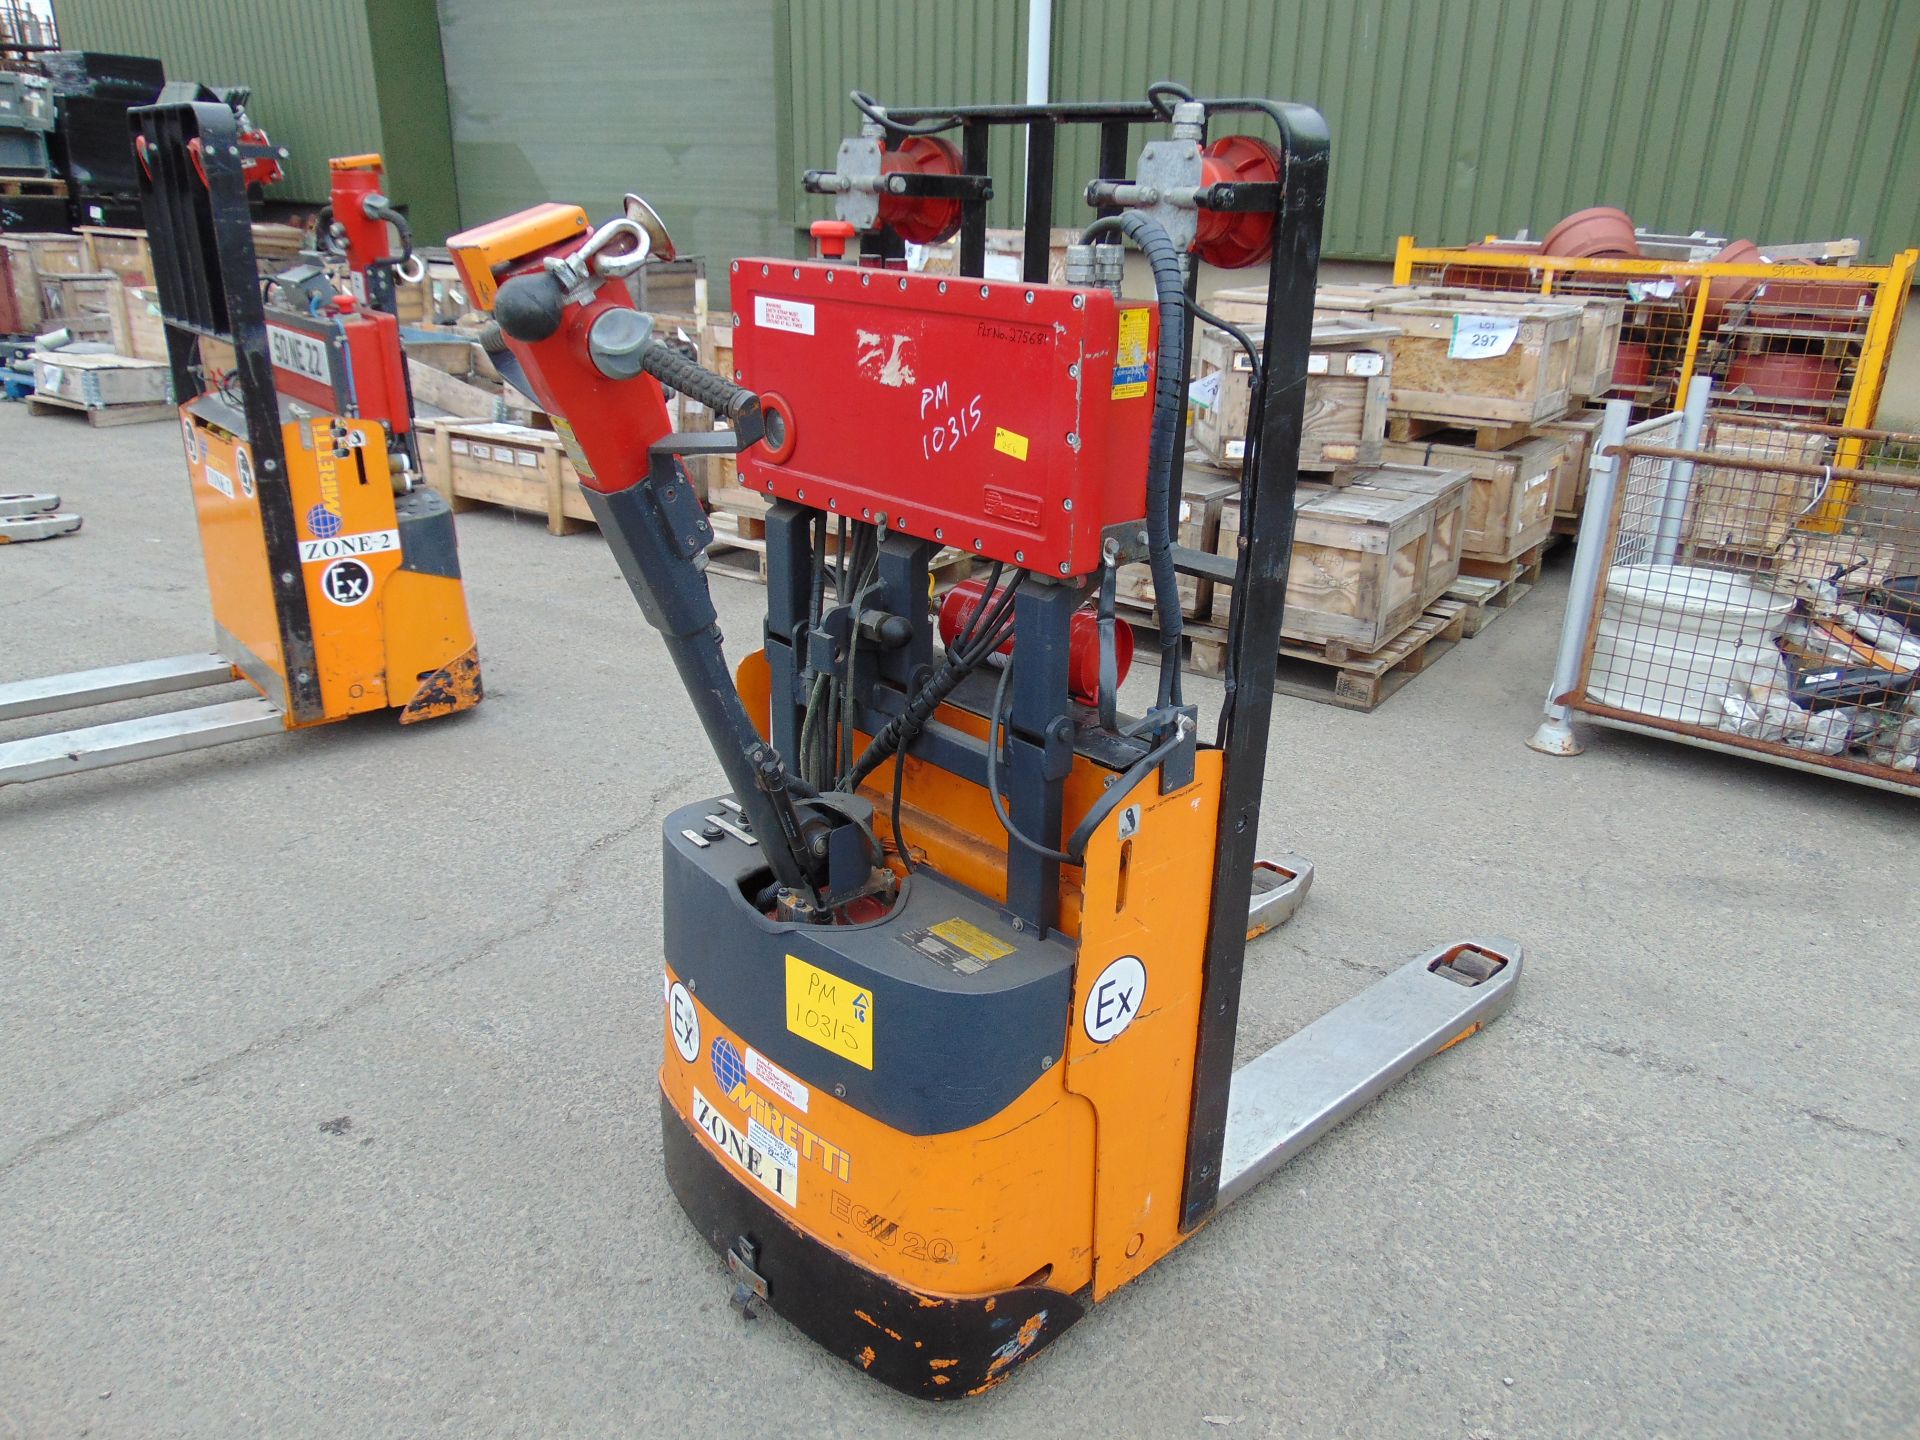 Still EGU 20 Class C, Zone 1 Protected Electric Powered Pallet Truck